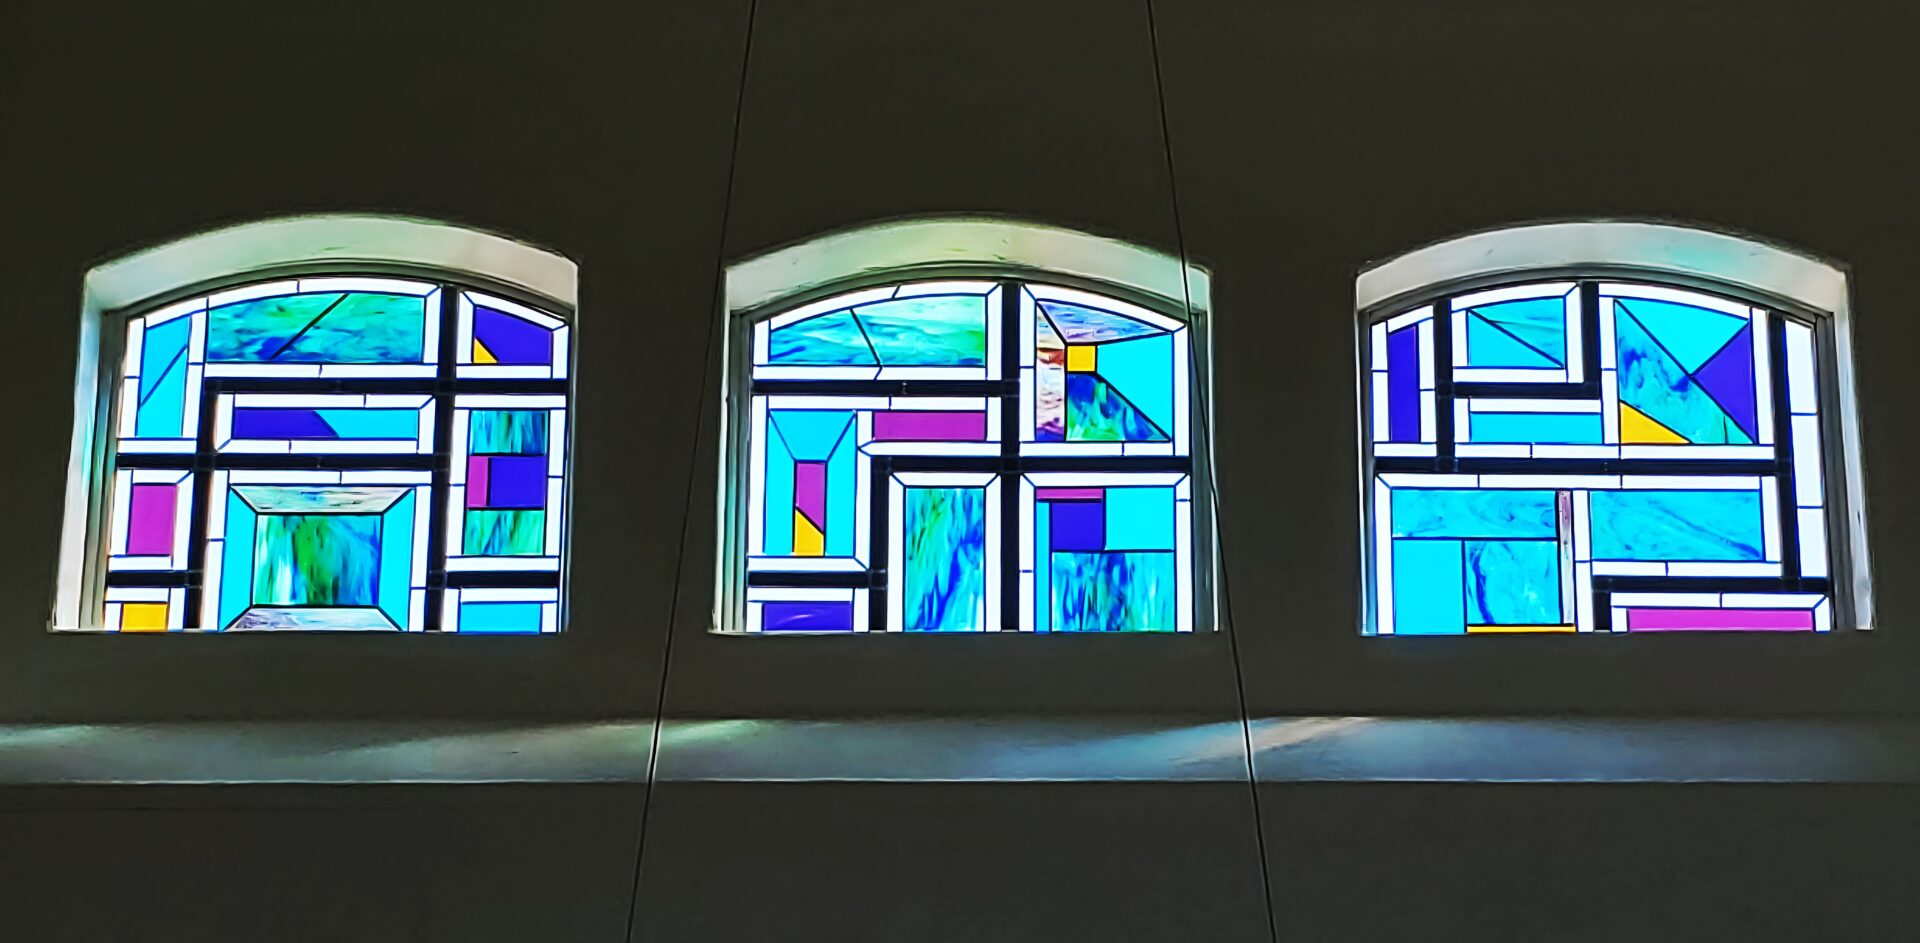 Three arched windows with colorful stained glass designs set against a gray wall.